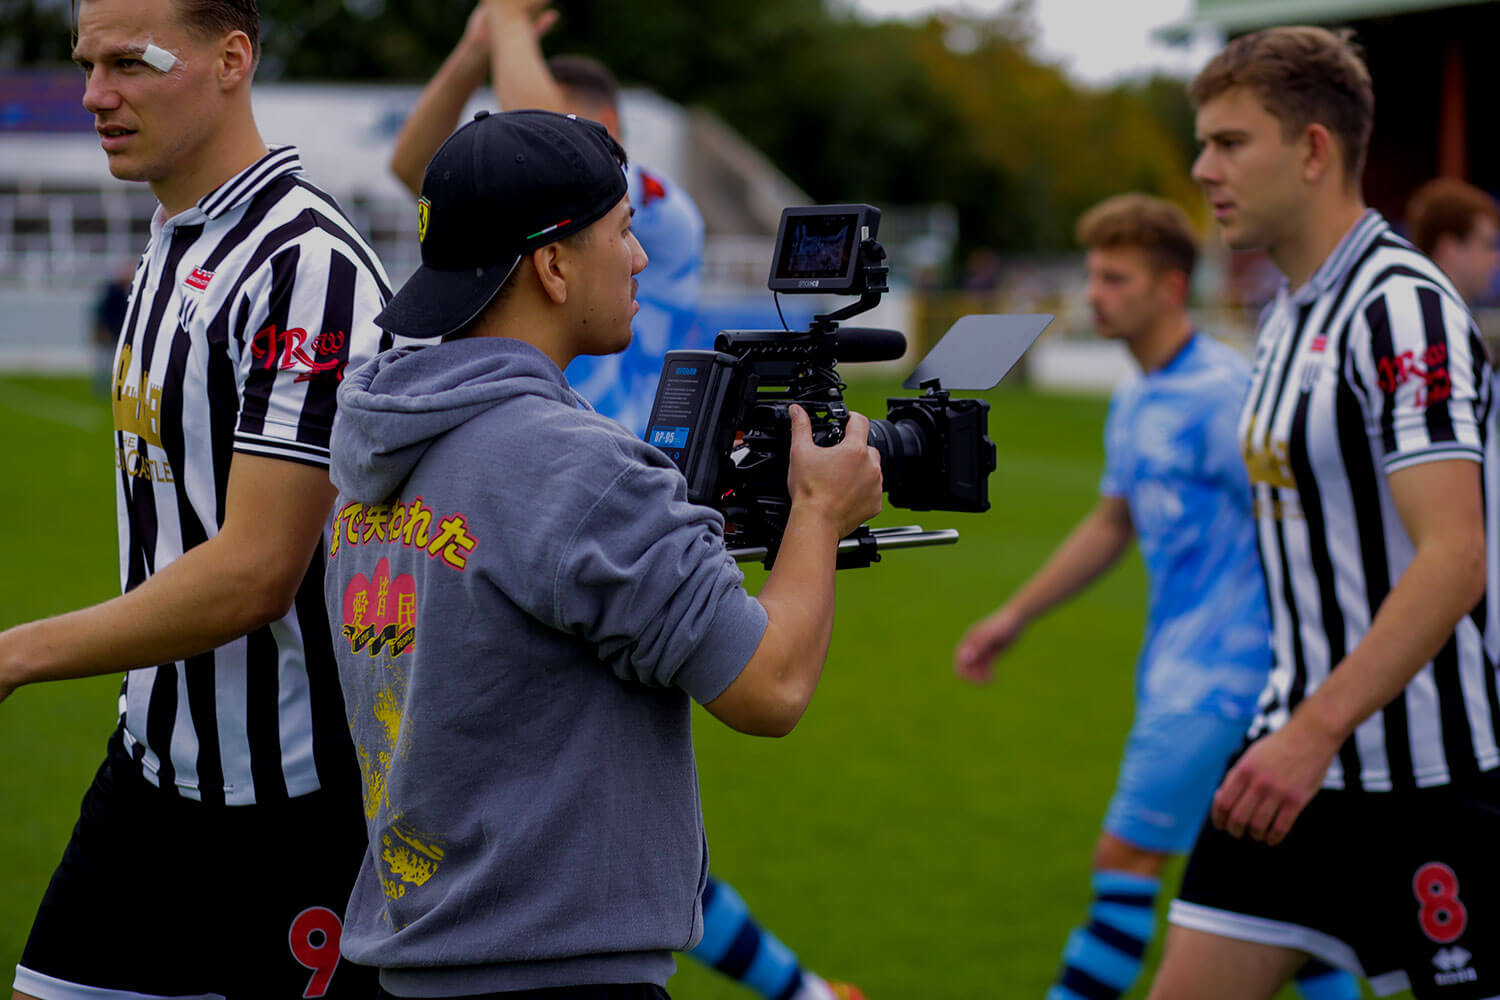 Student filming players on a pitch